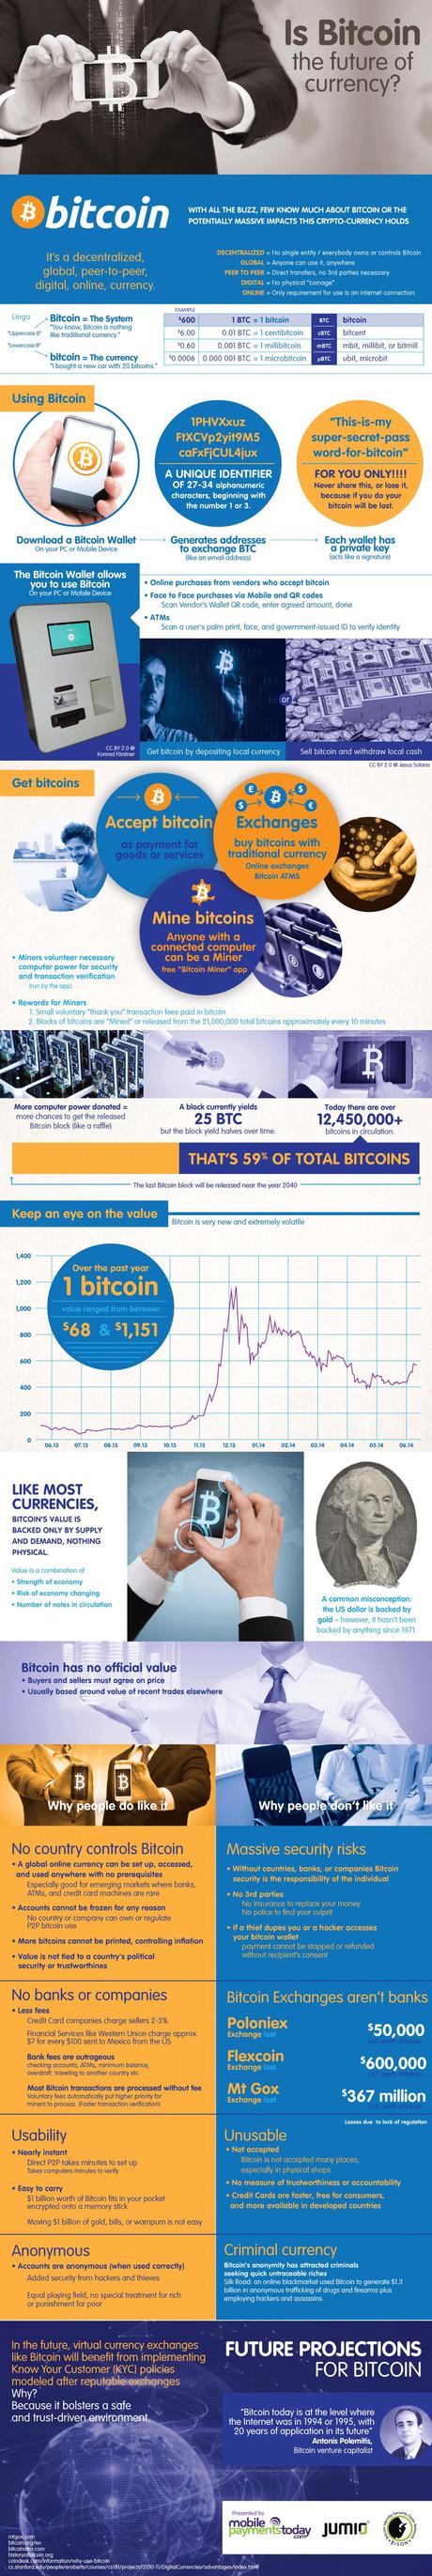 Bitcoin: The Future of Currency? [infographic]